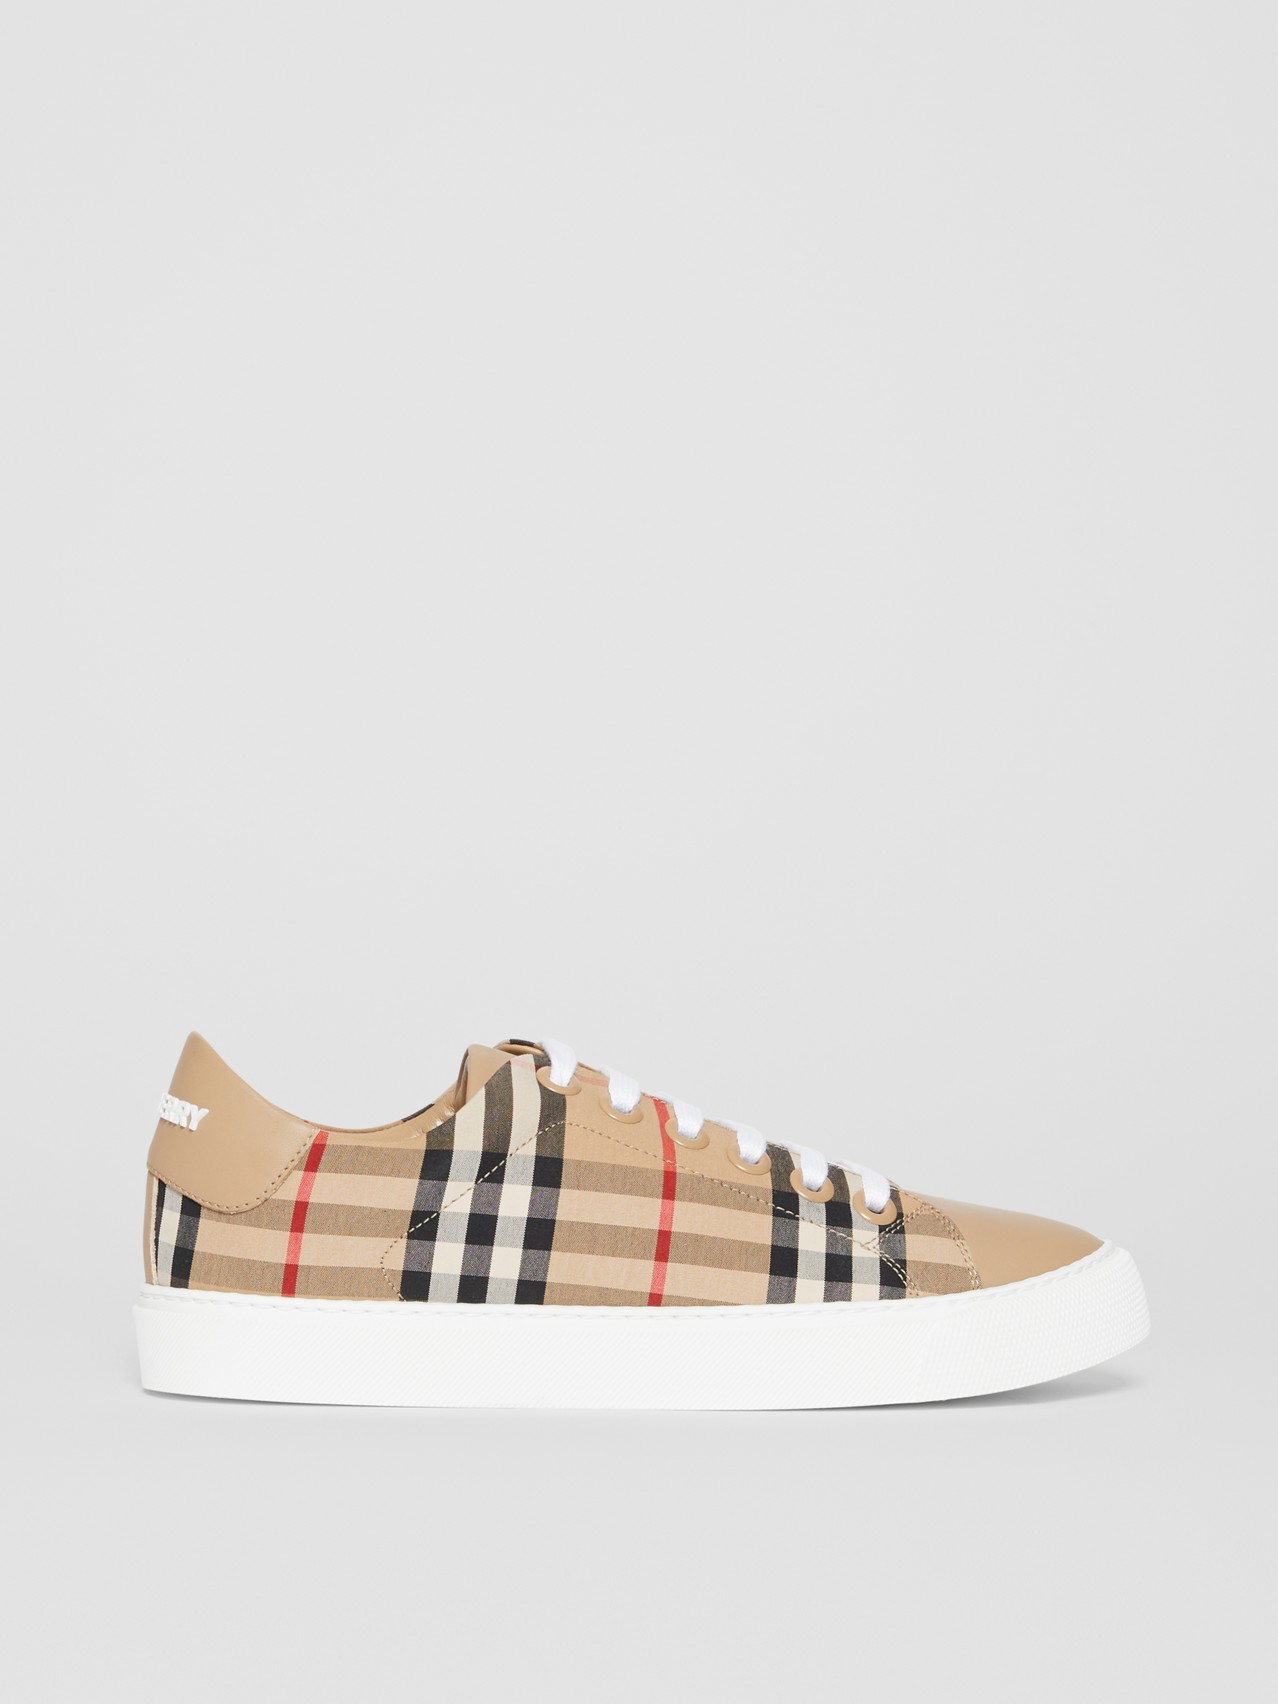 Vintage Check and Leather Sneakers by Burberry, available on burberry.com for $390 Bella Hadid Shoes SIMILAR PRODUCT